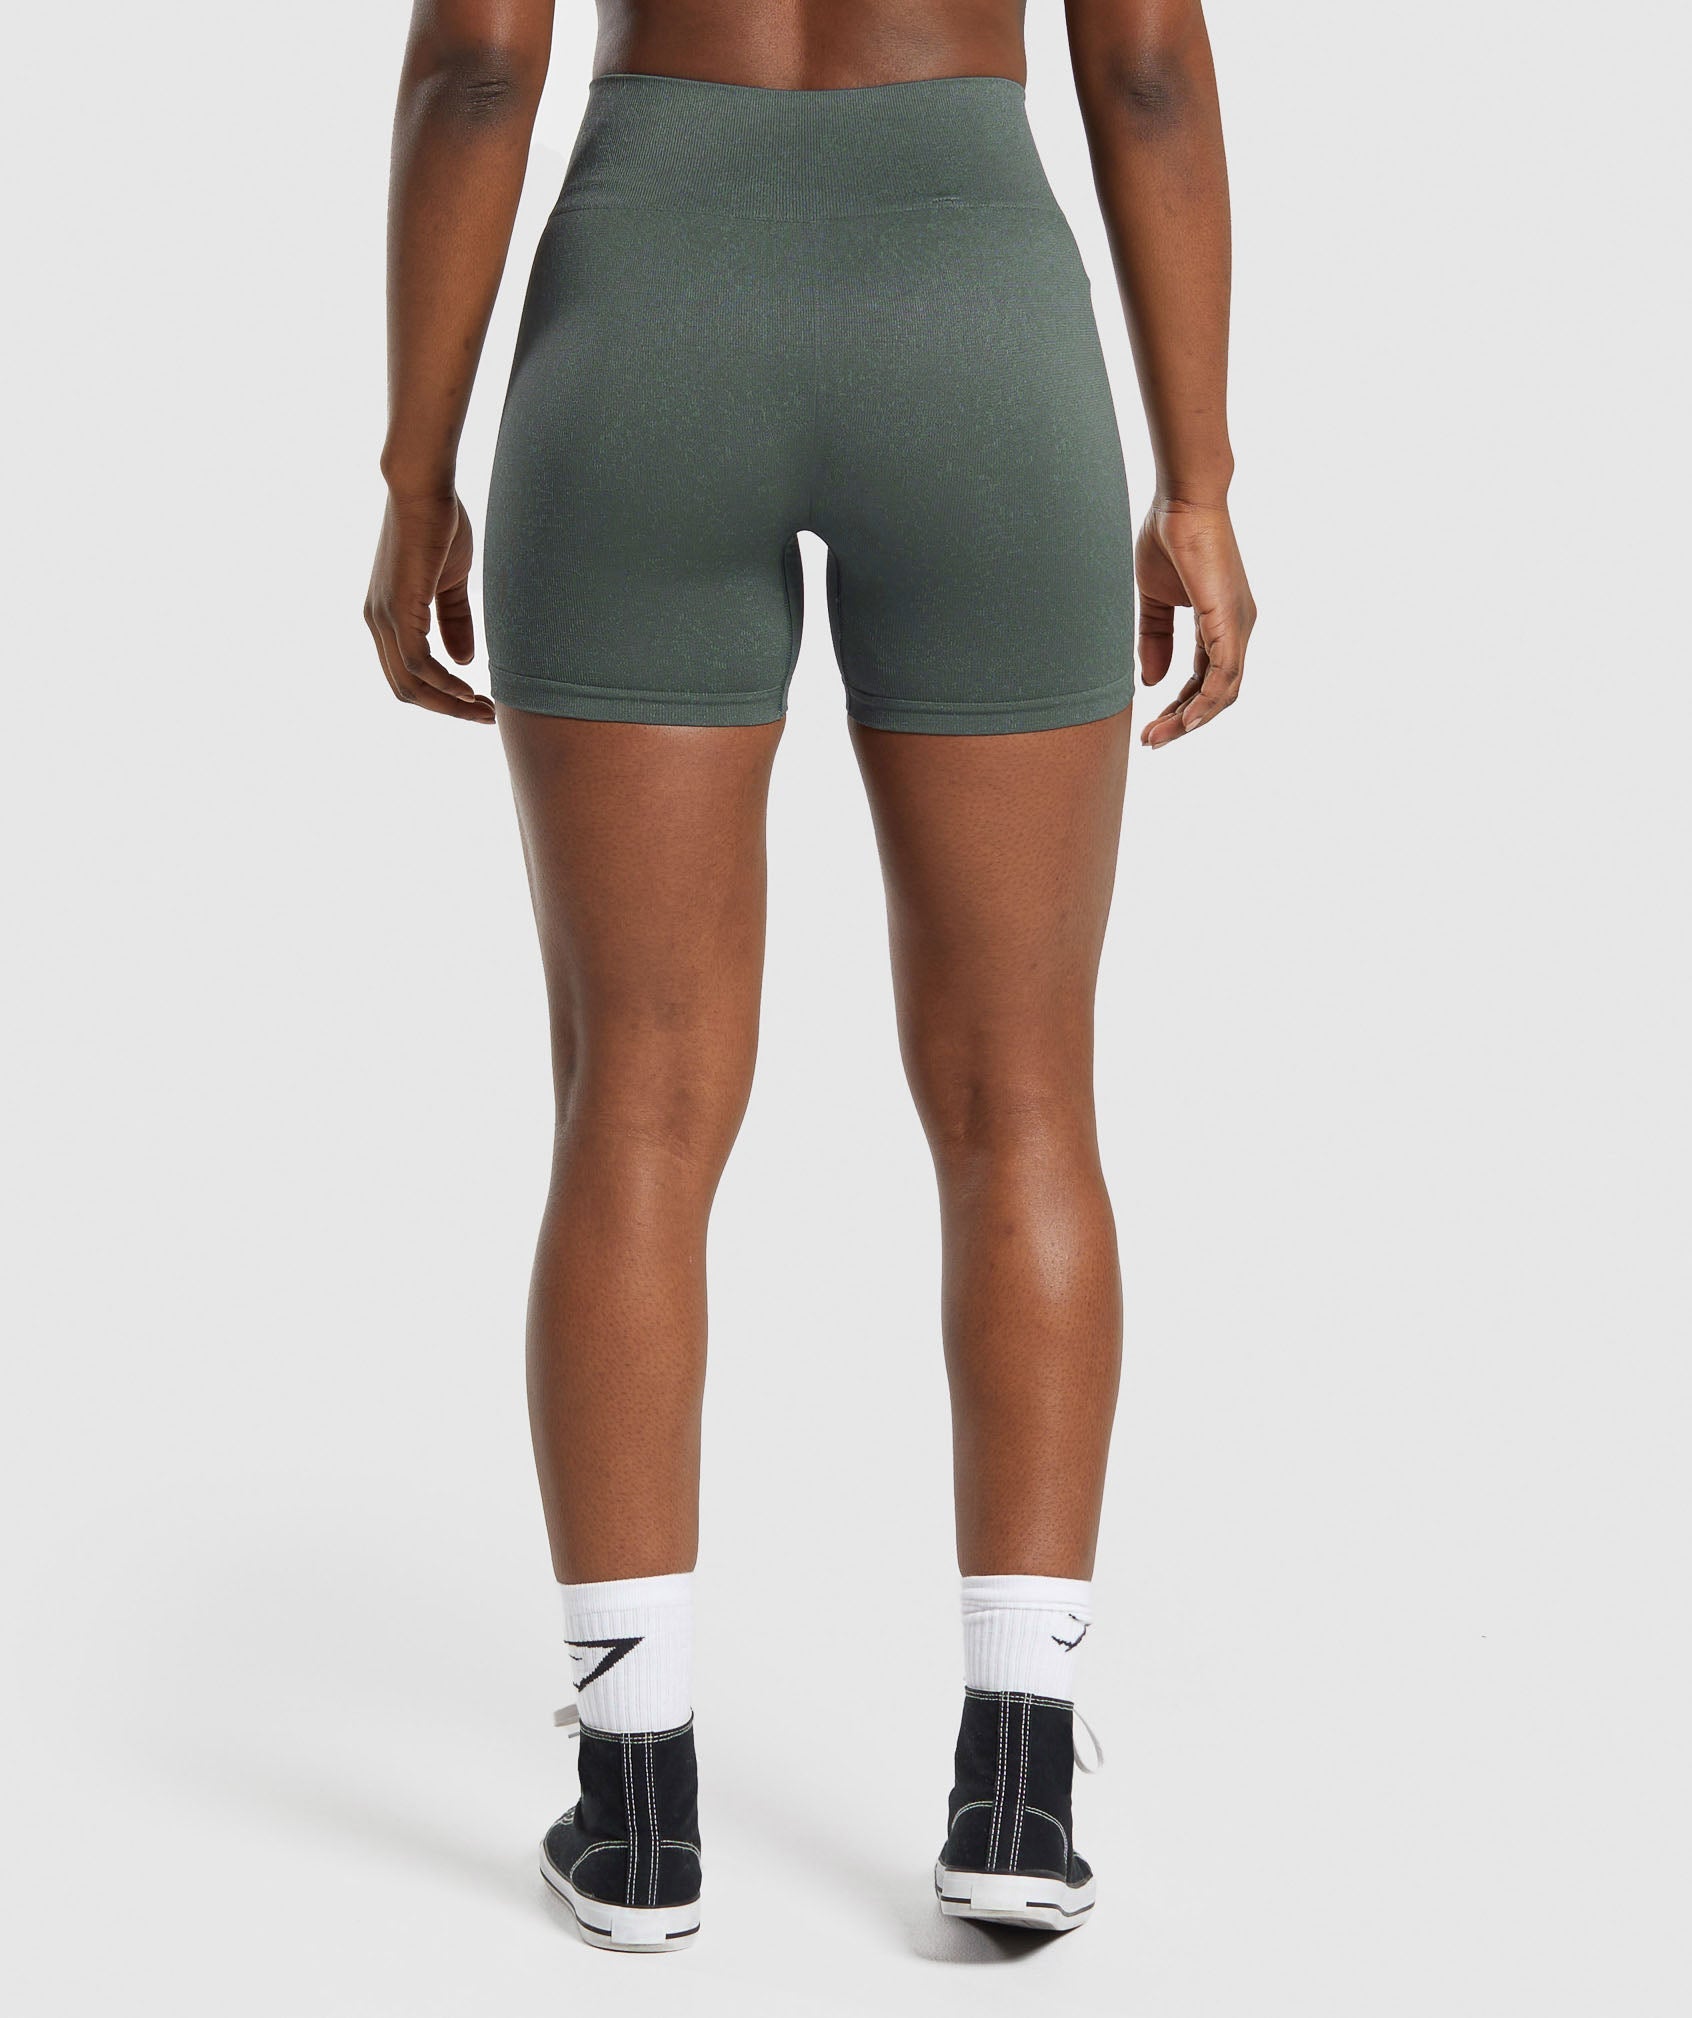 Adapt Fleck Seamless Shorts in Slate Teal/Cargo Teal - view 2